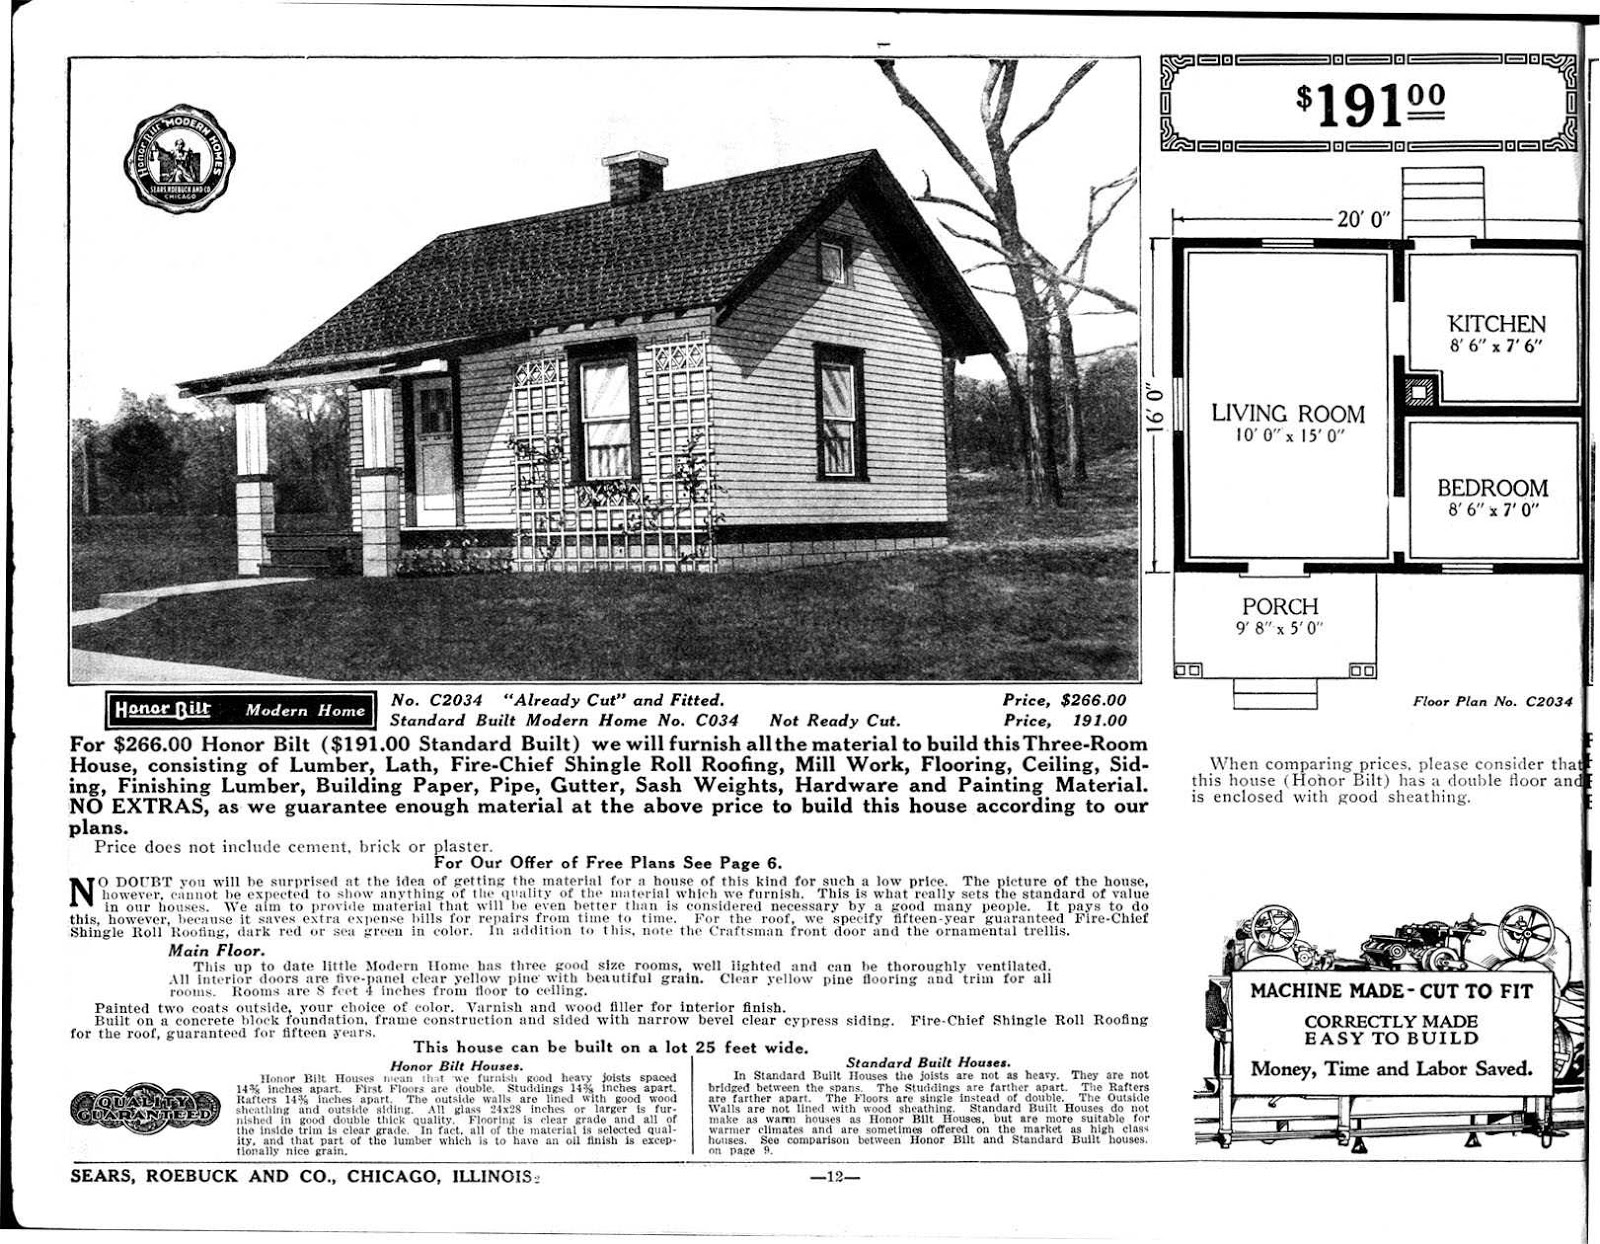 Sears Catalog  Kit Homes  From the Early 20th Century 